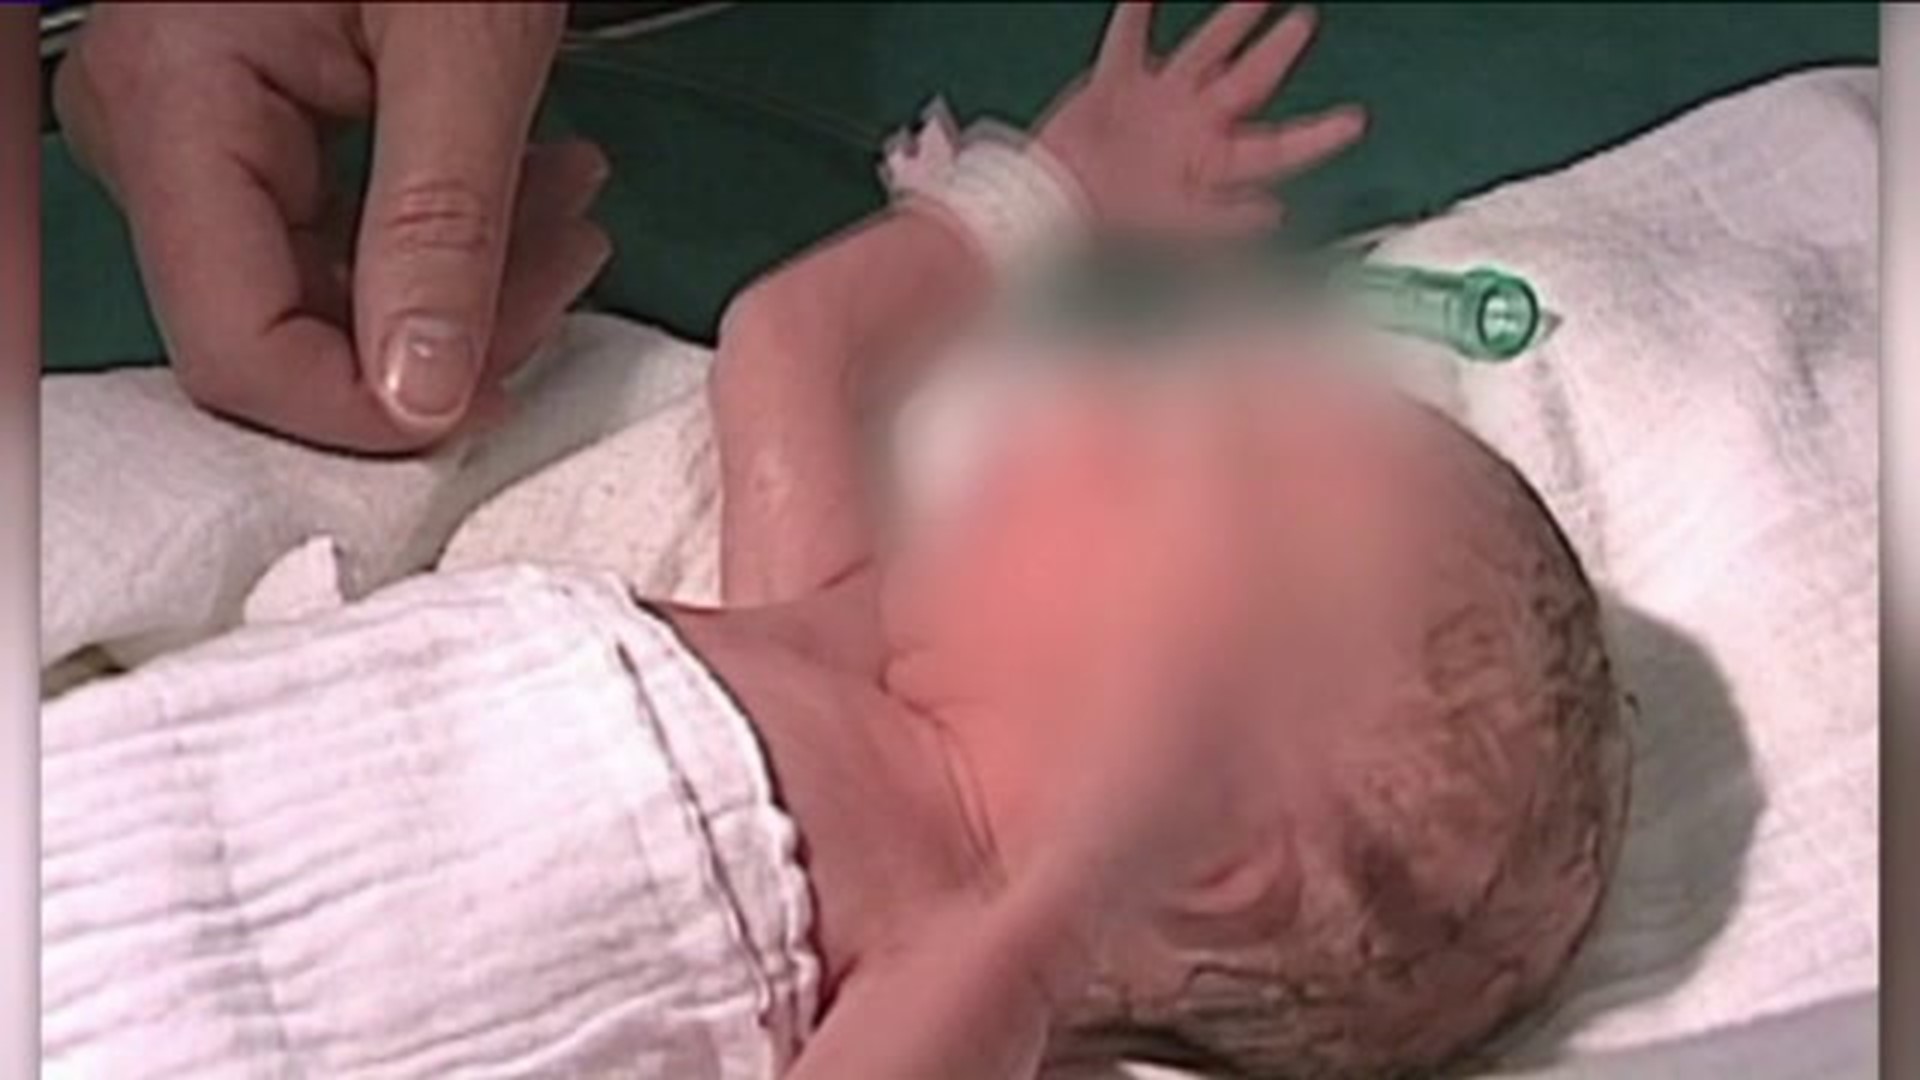 Parents who can`t care for newborns encouraged to learn about Safe Haven law